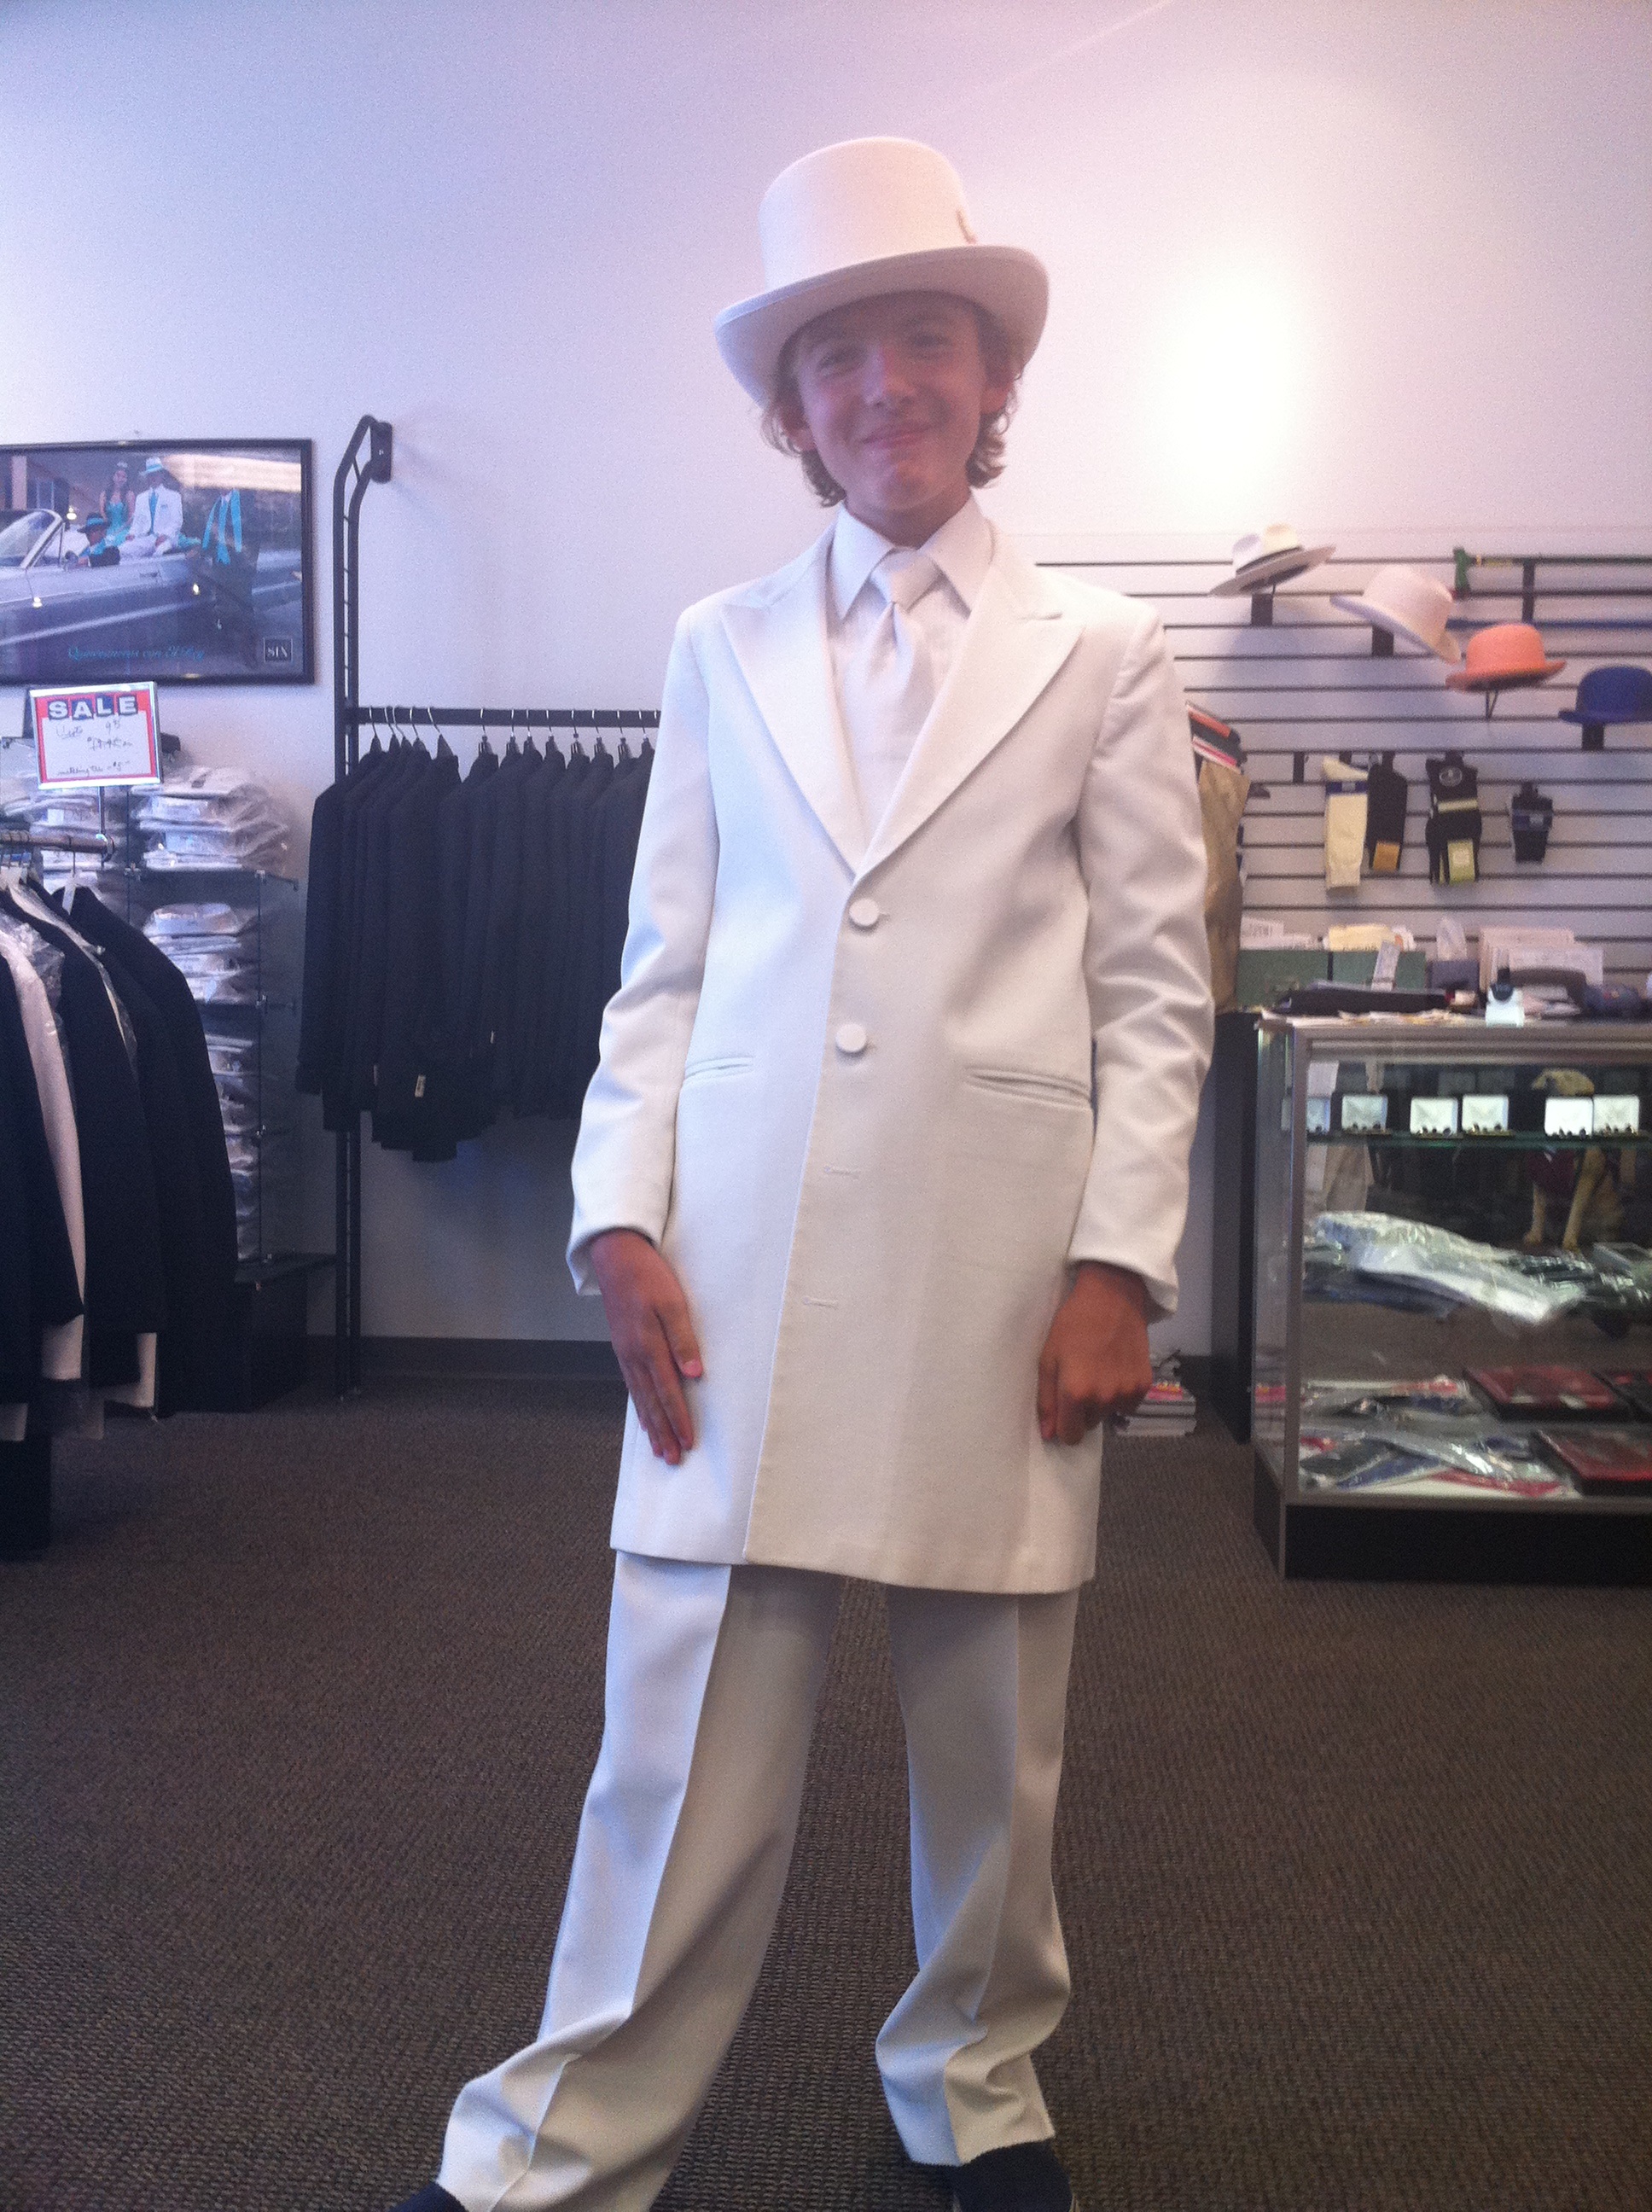 Adam trying on costume for Fred Astaire number, Top Hat and Tails.